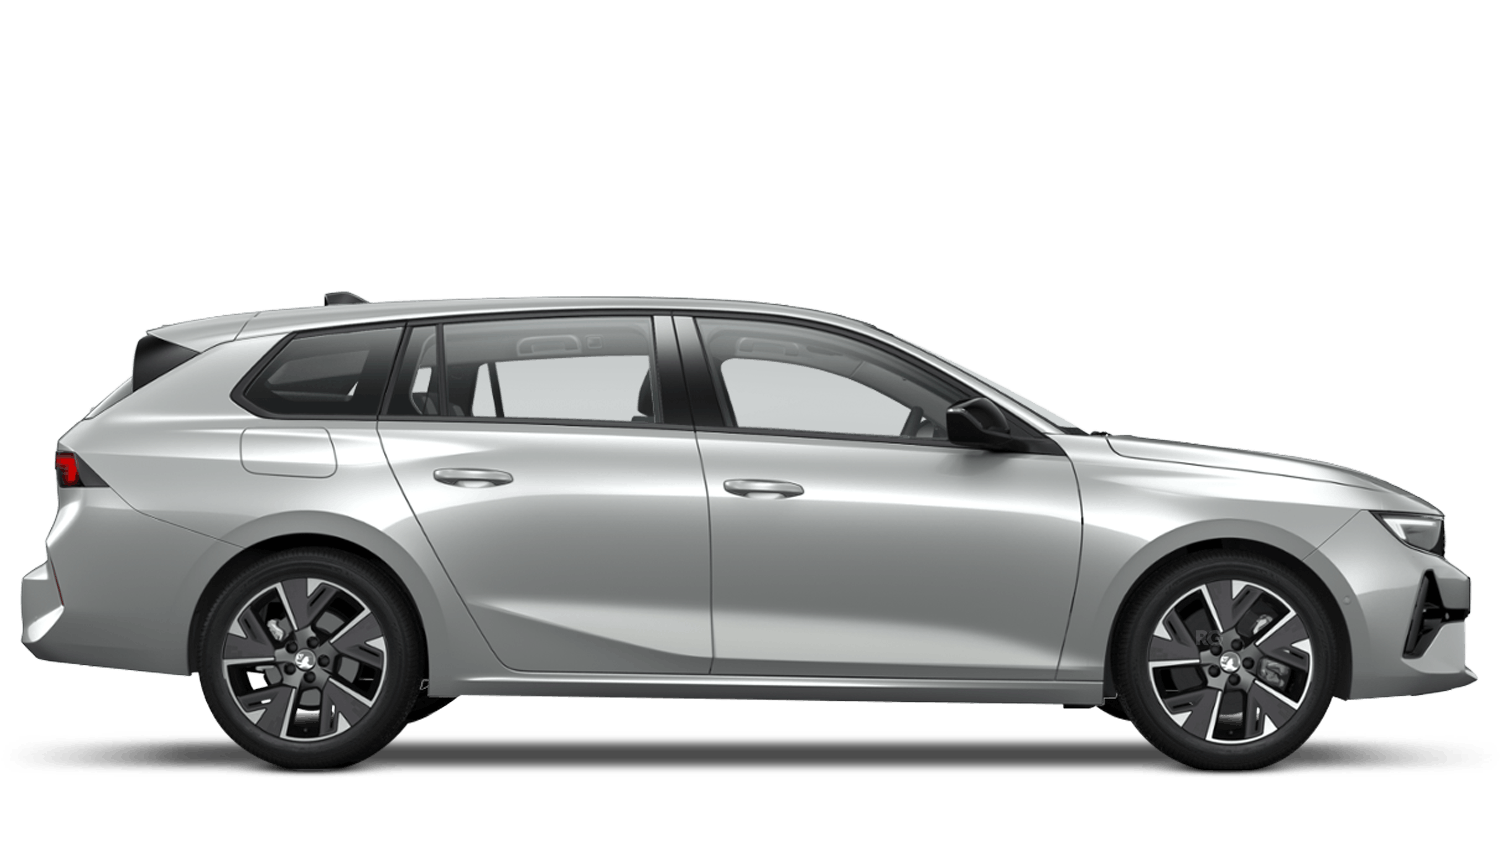 Crystal Silver Vauxhall Astra Sports Tourer Electric